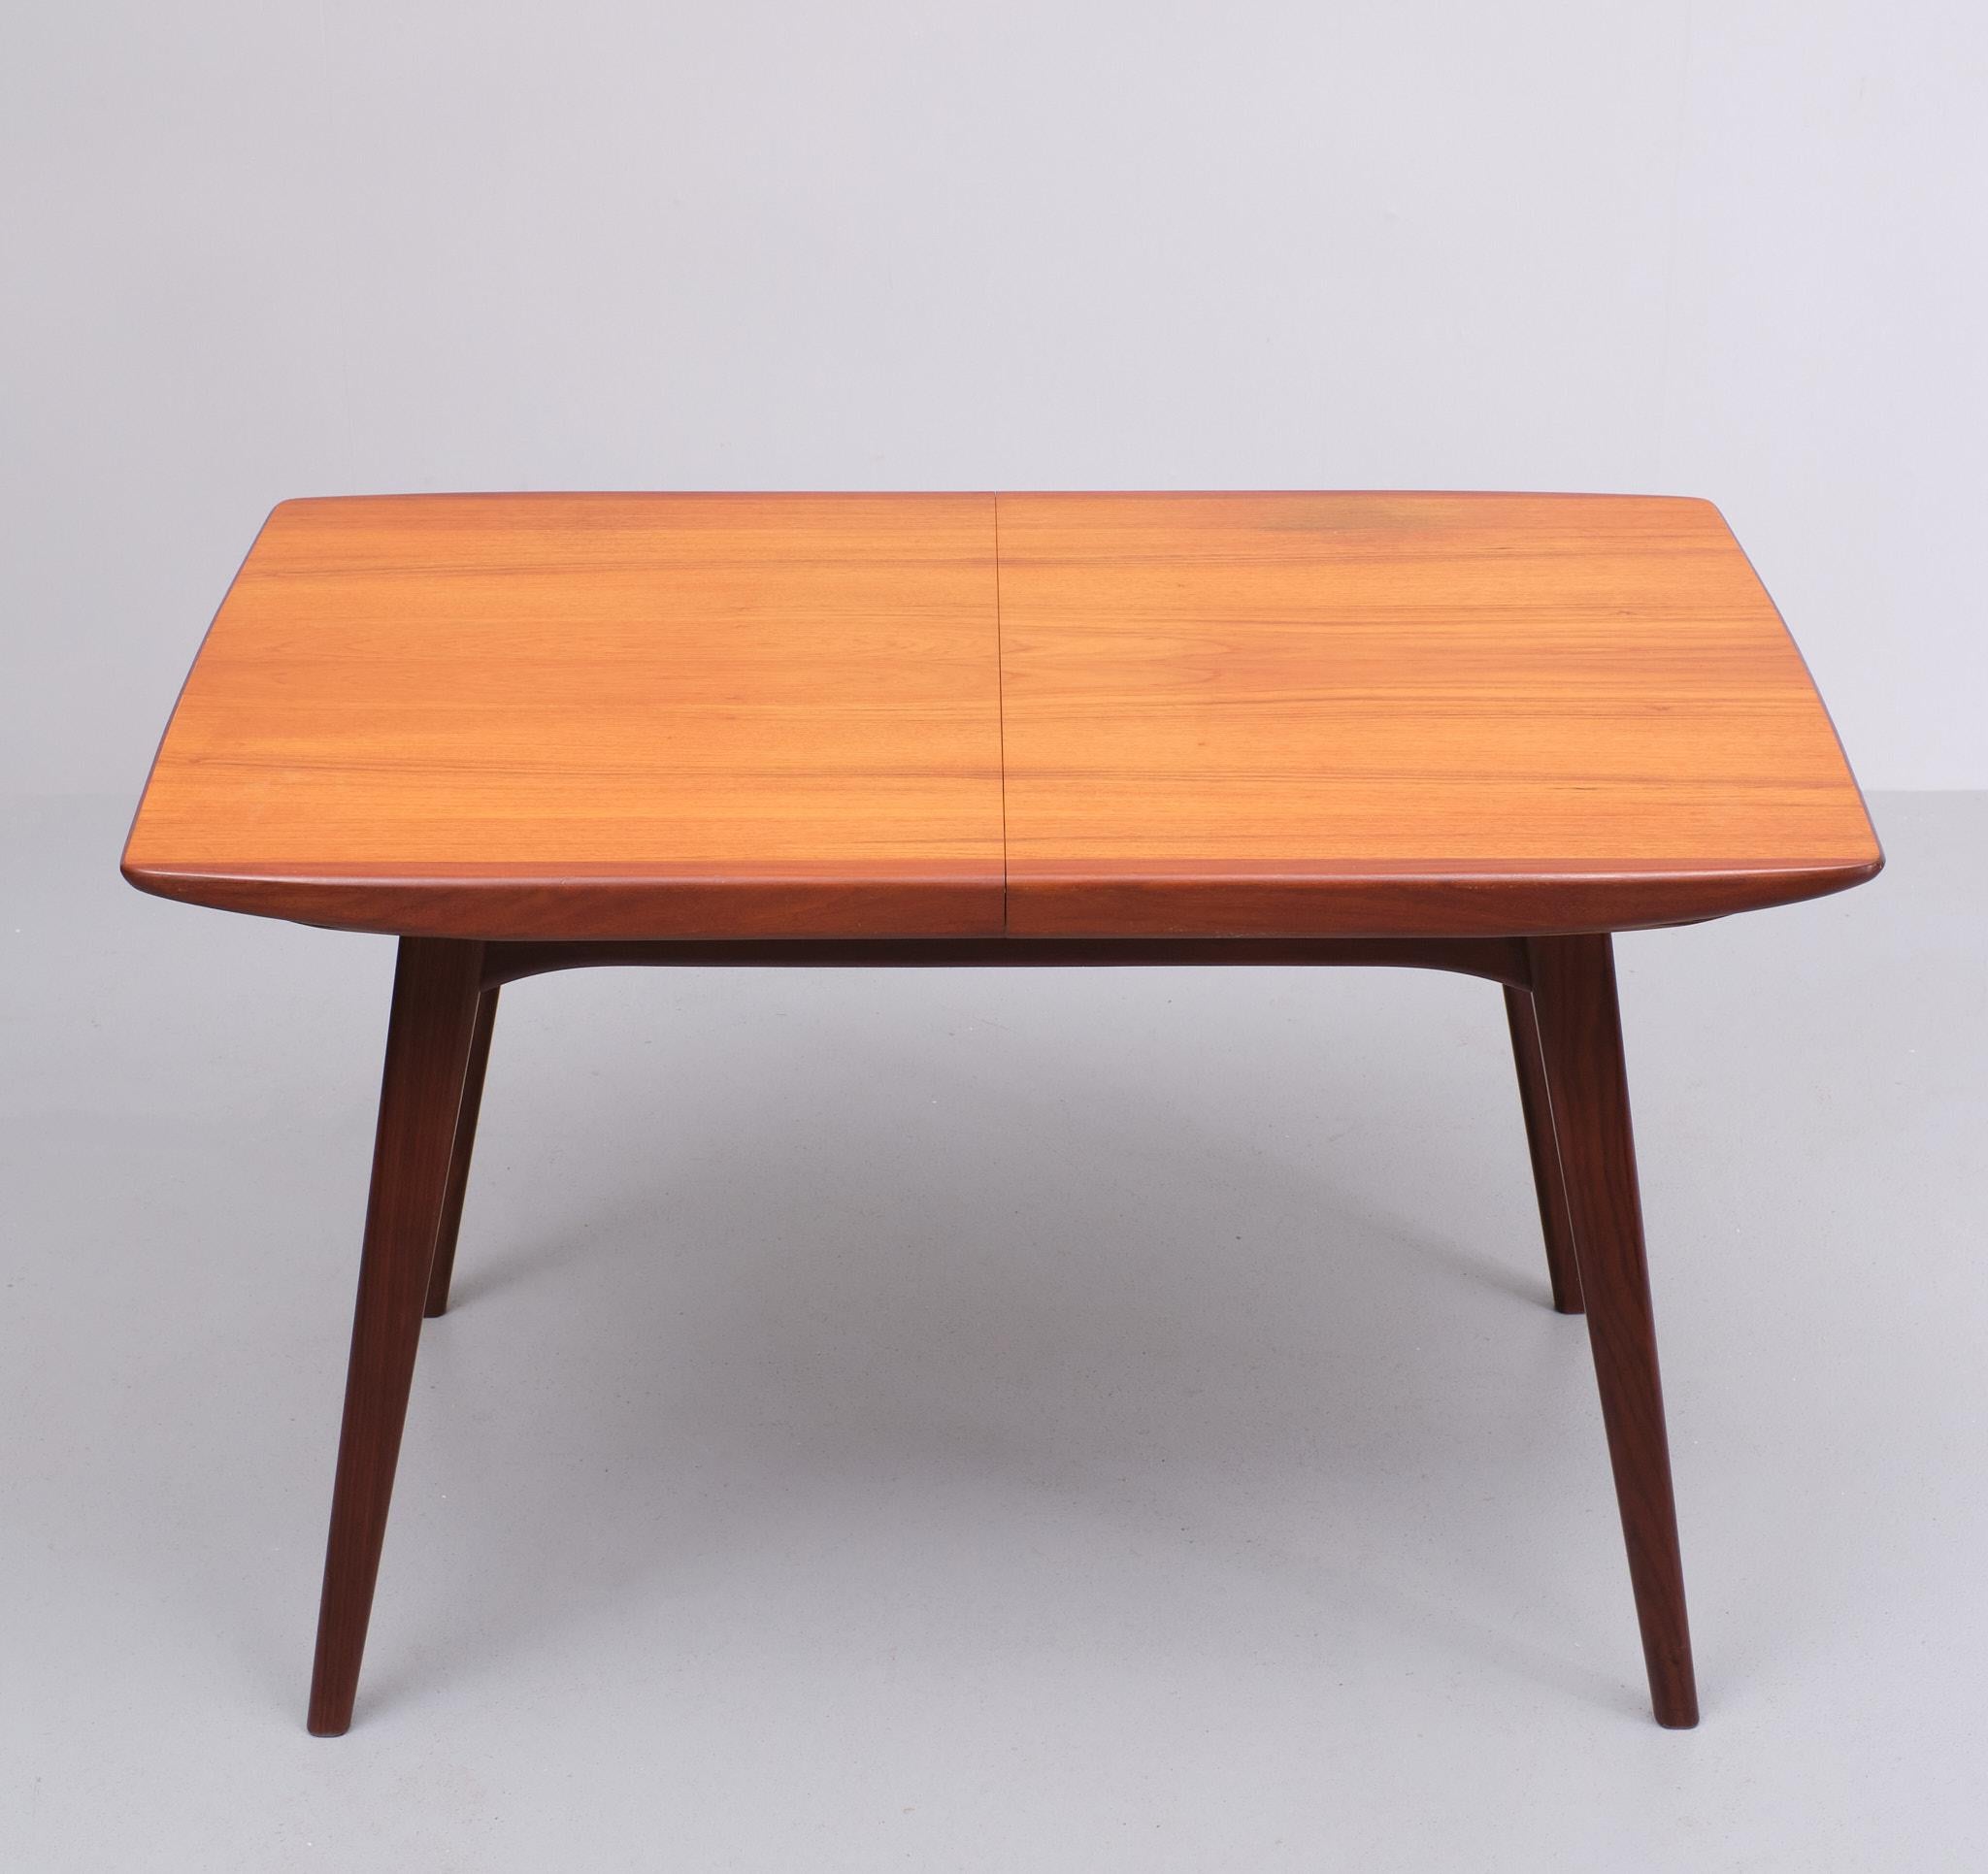 Beautiful Teak extendable dining table ,Very good quality table .comes with 
a folding out extension. Nice organic shape .   Design by Louis van Teeffelen 
for Wébé  Holland 1960s . One stain on the table .see photos .
Height 74 cm Width 120 cm to